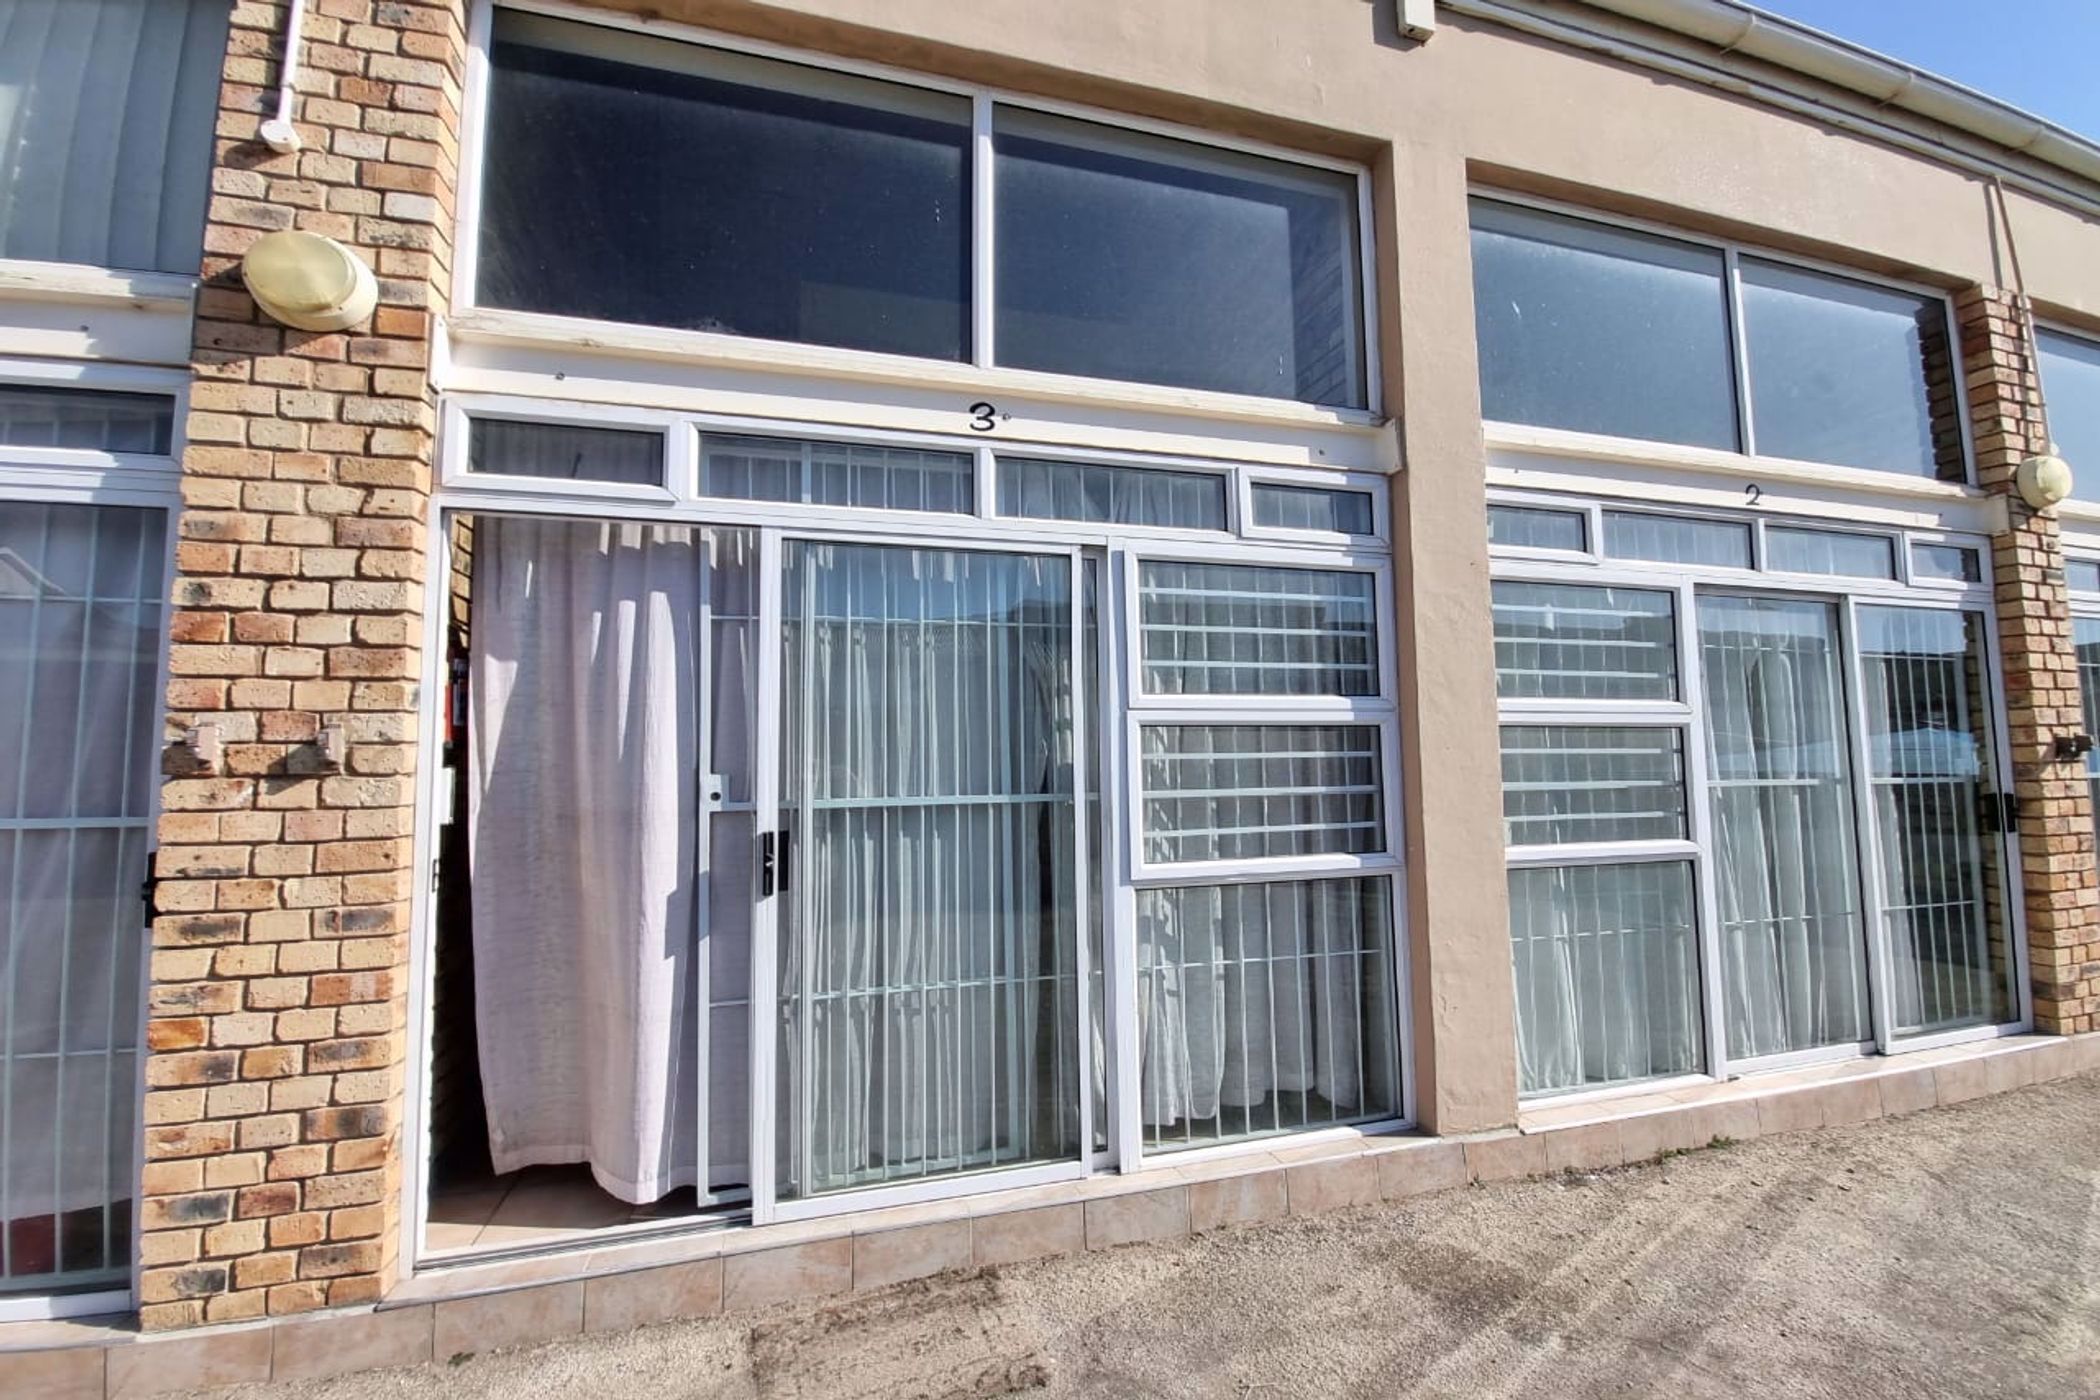 1 bedroom apartment to rent in Makhanda (Grahamstown) Central